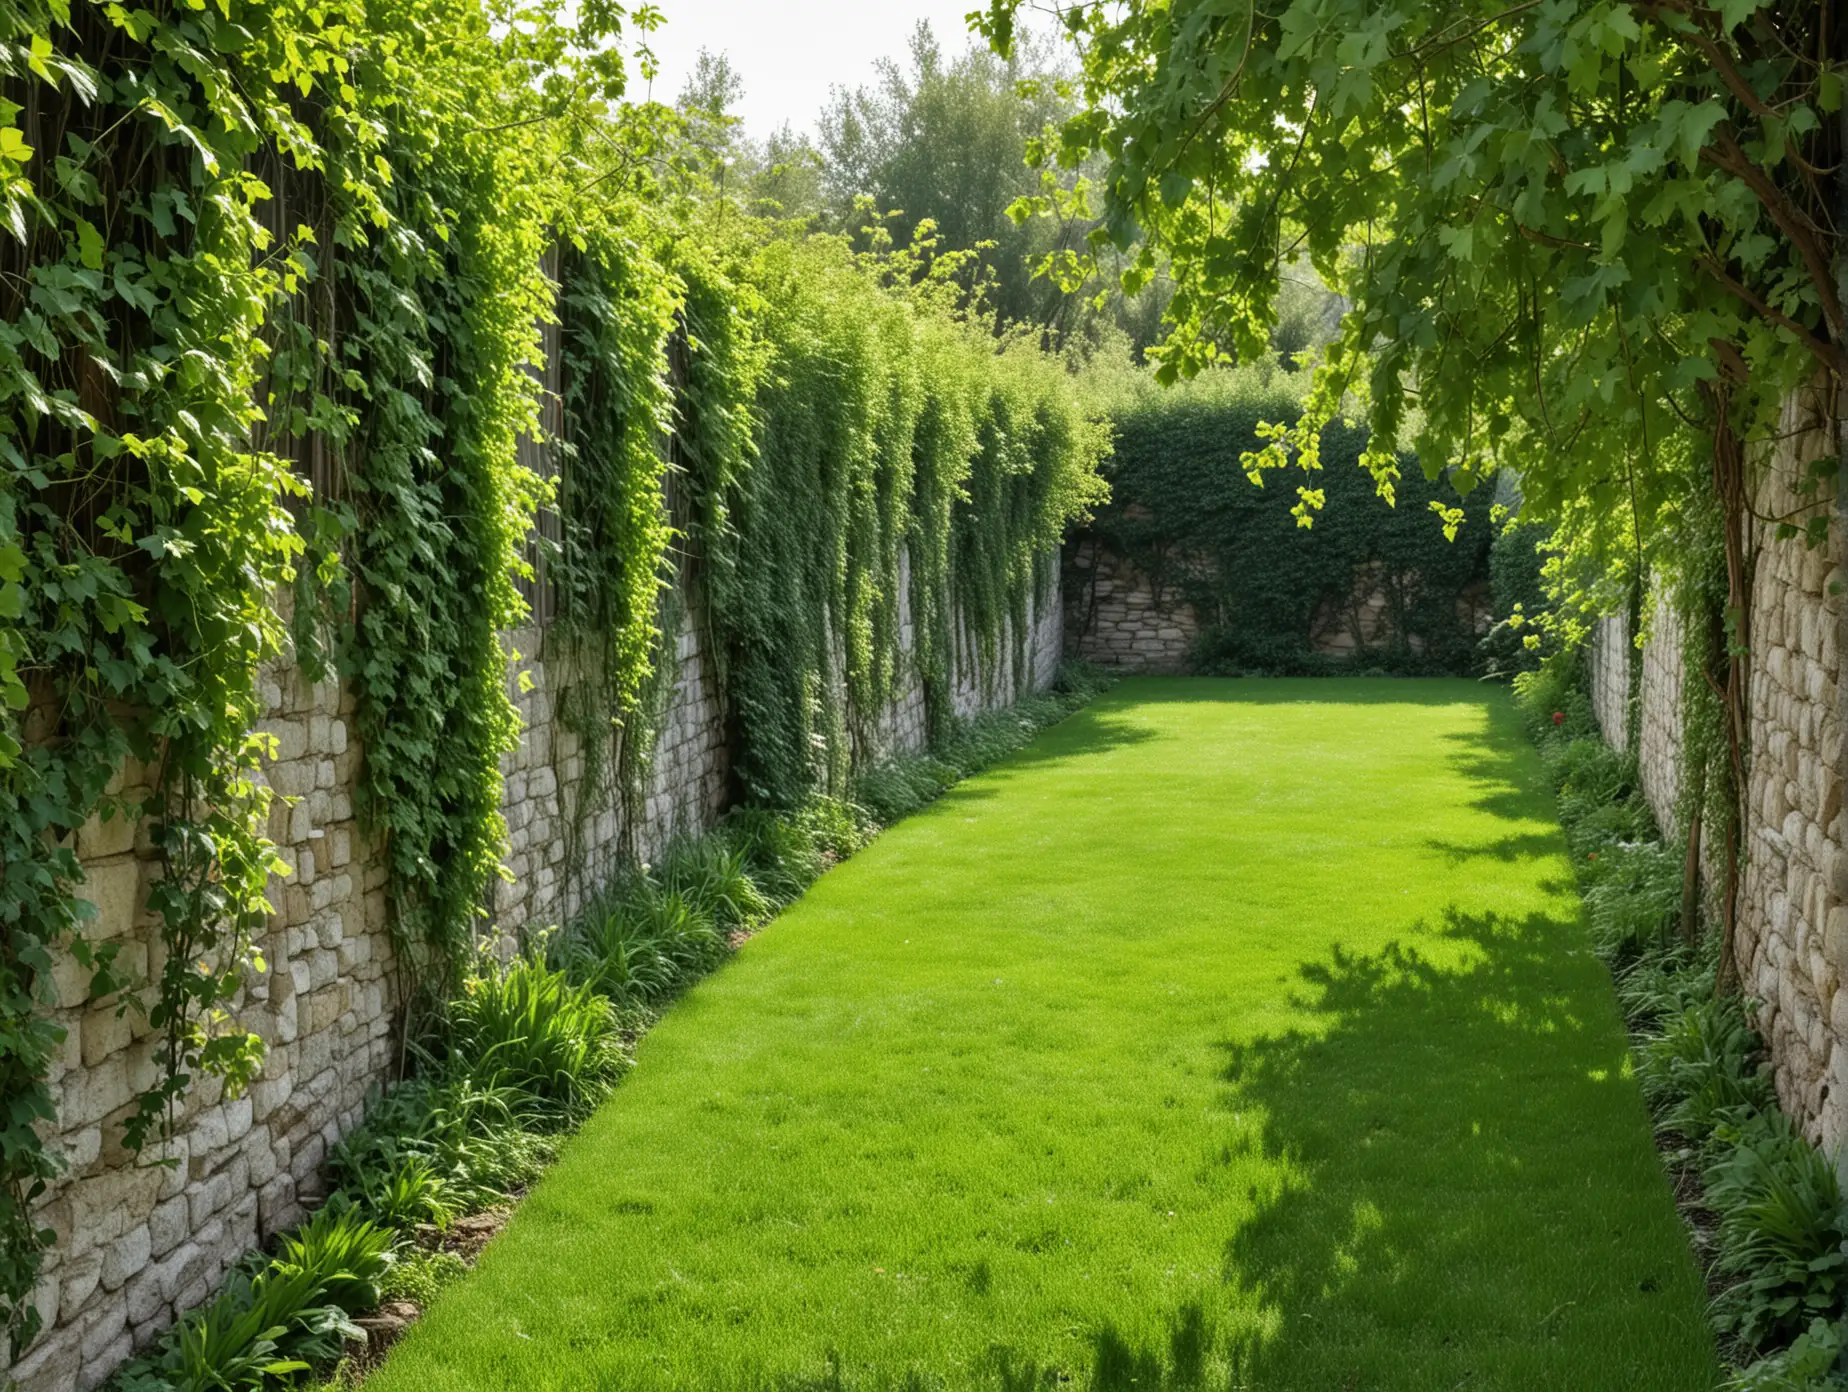 Scenic View Overgrown Grapevine Wall and Freshly Mowed Lawn